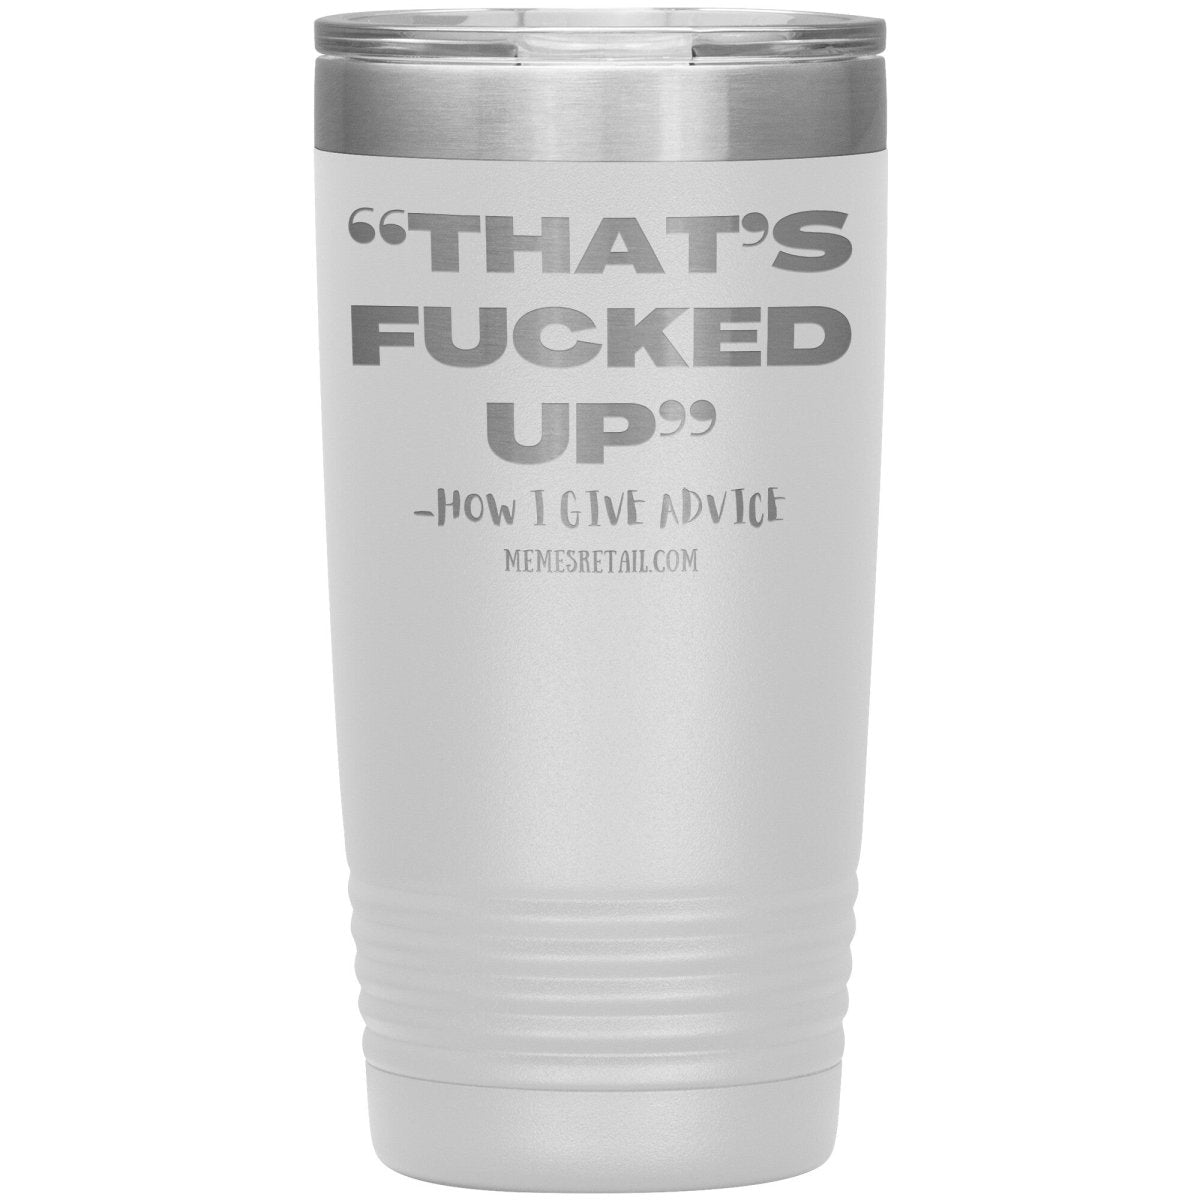 “That’s Fucked Up” -how I give advice Tumblers, 20oz Insulated Tumbler / White - MemesRetail.com